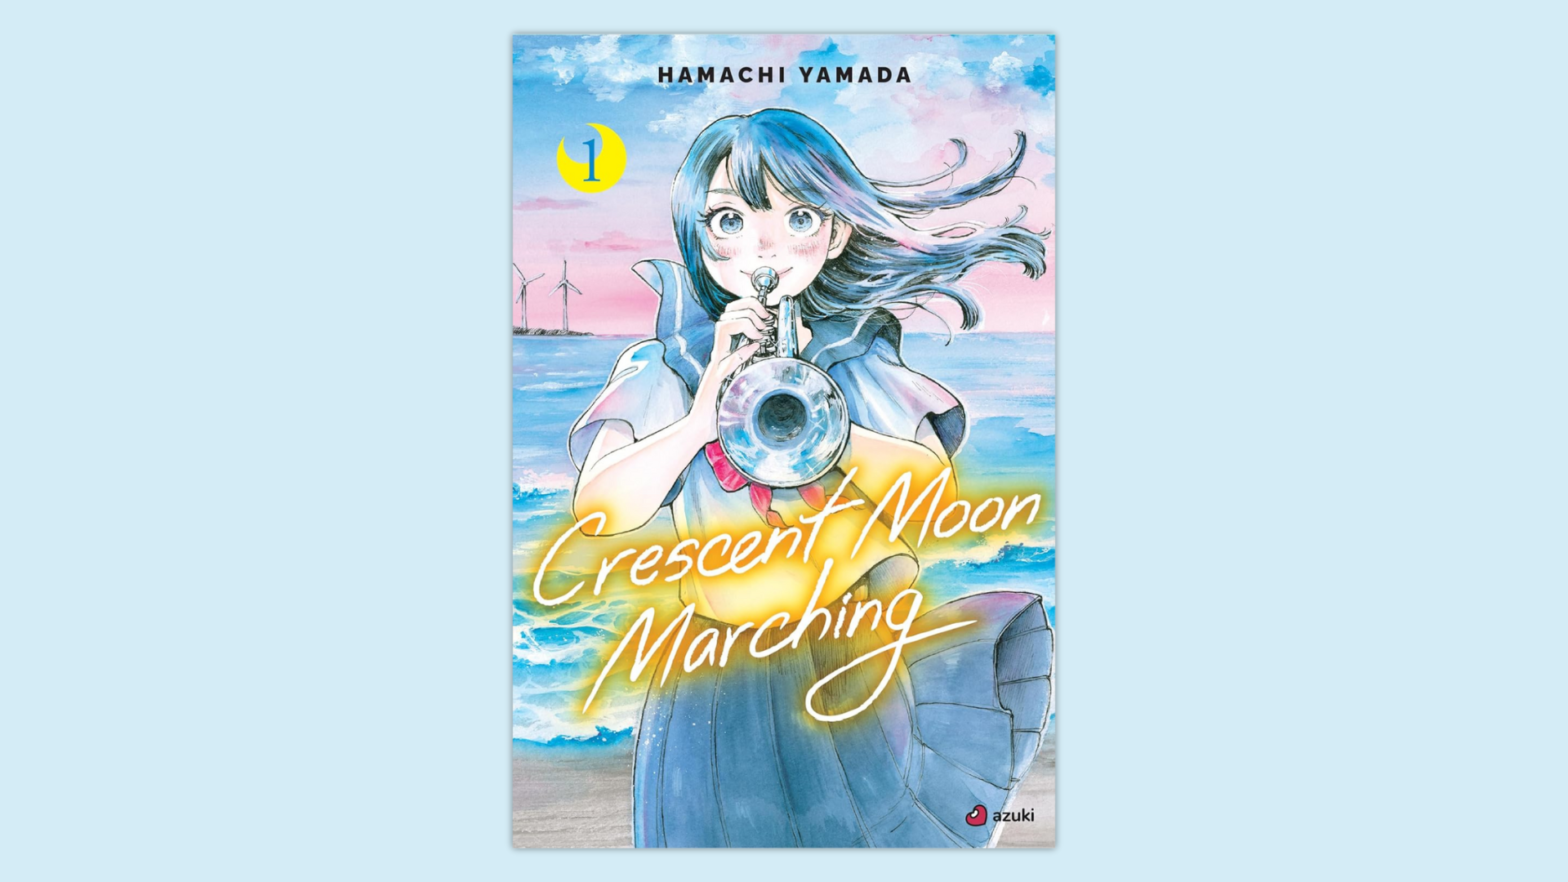 Crescent Moon Marching Volume 1 by Hamachi Yamada. Azuki. A high school girl playing trumpet by the beach.